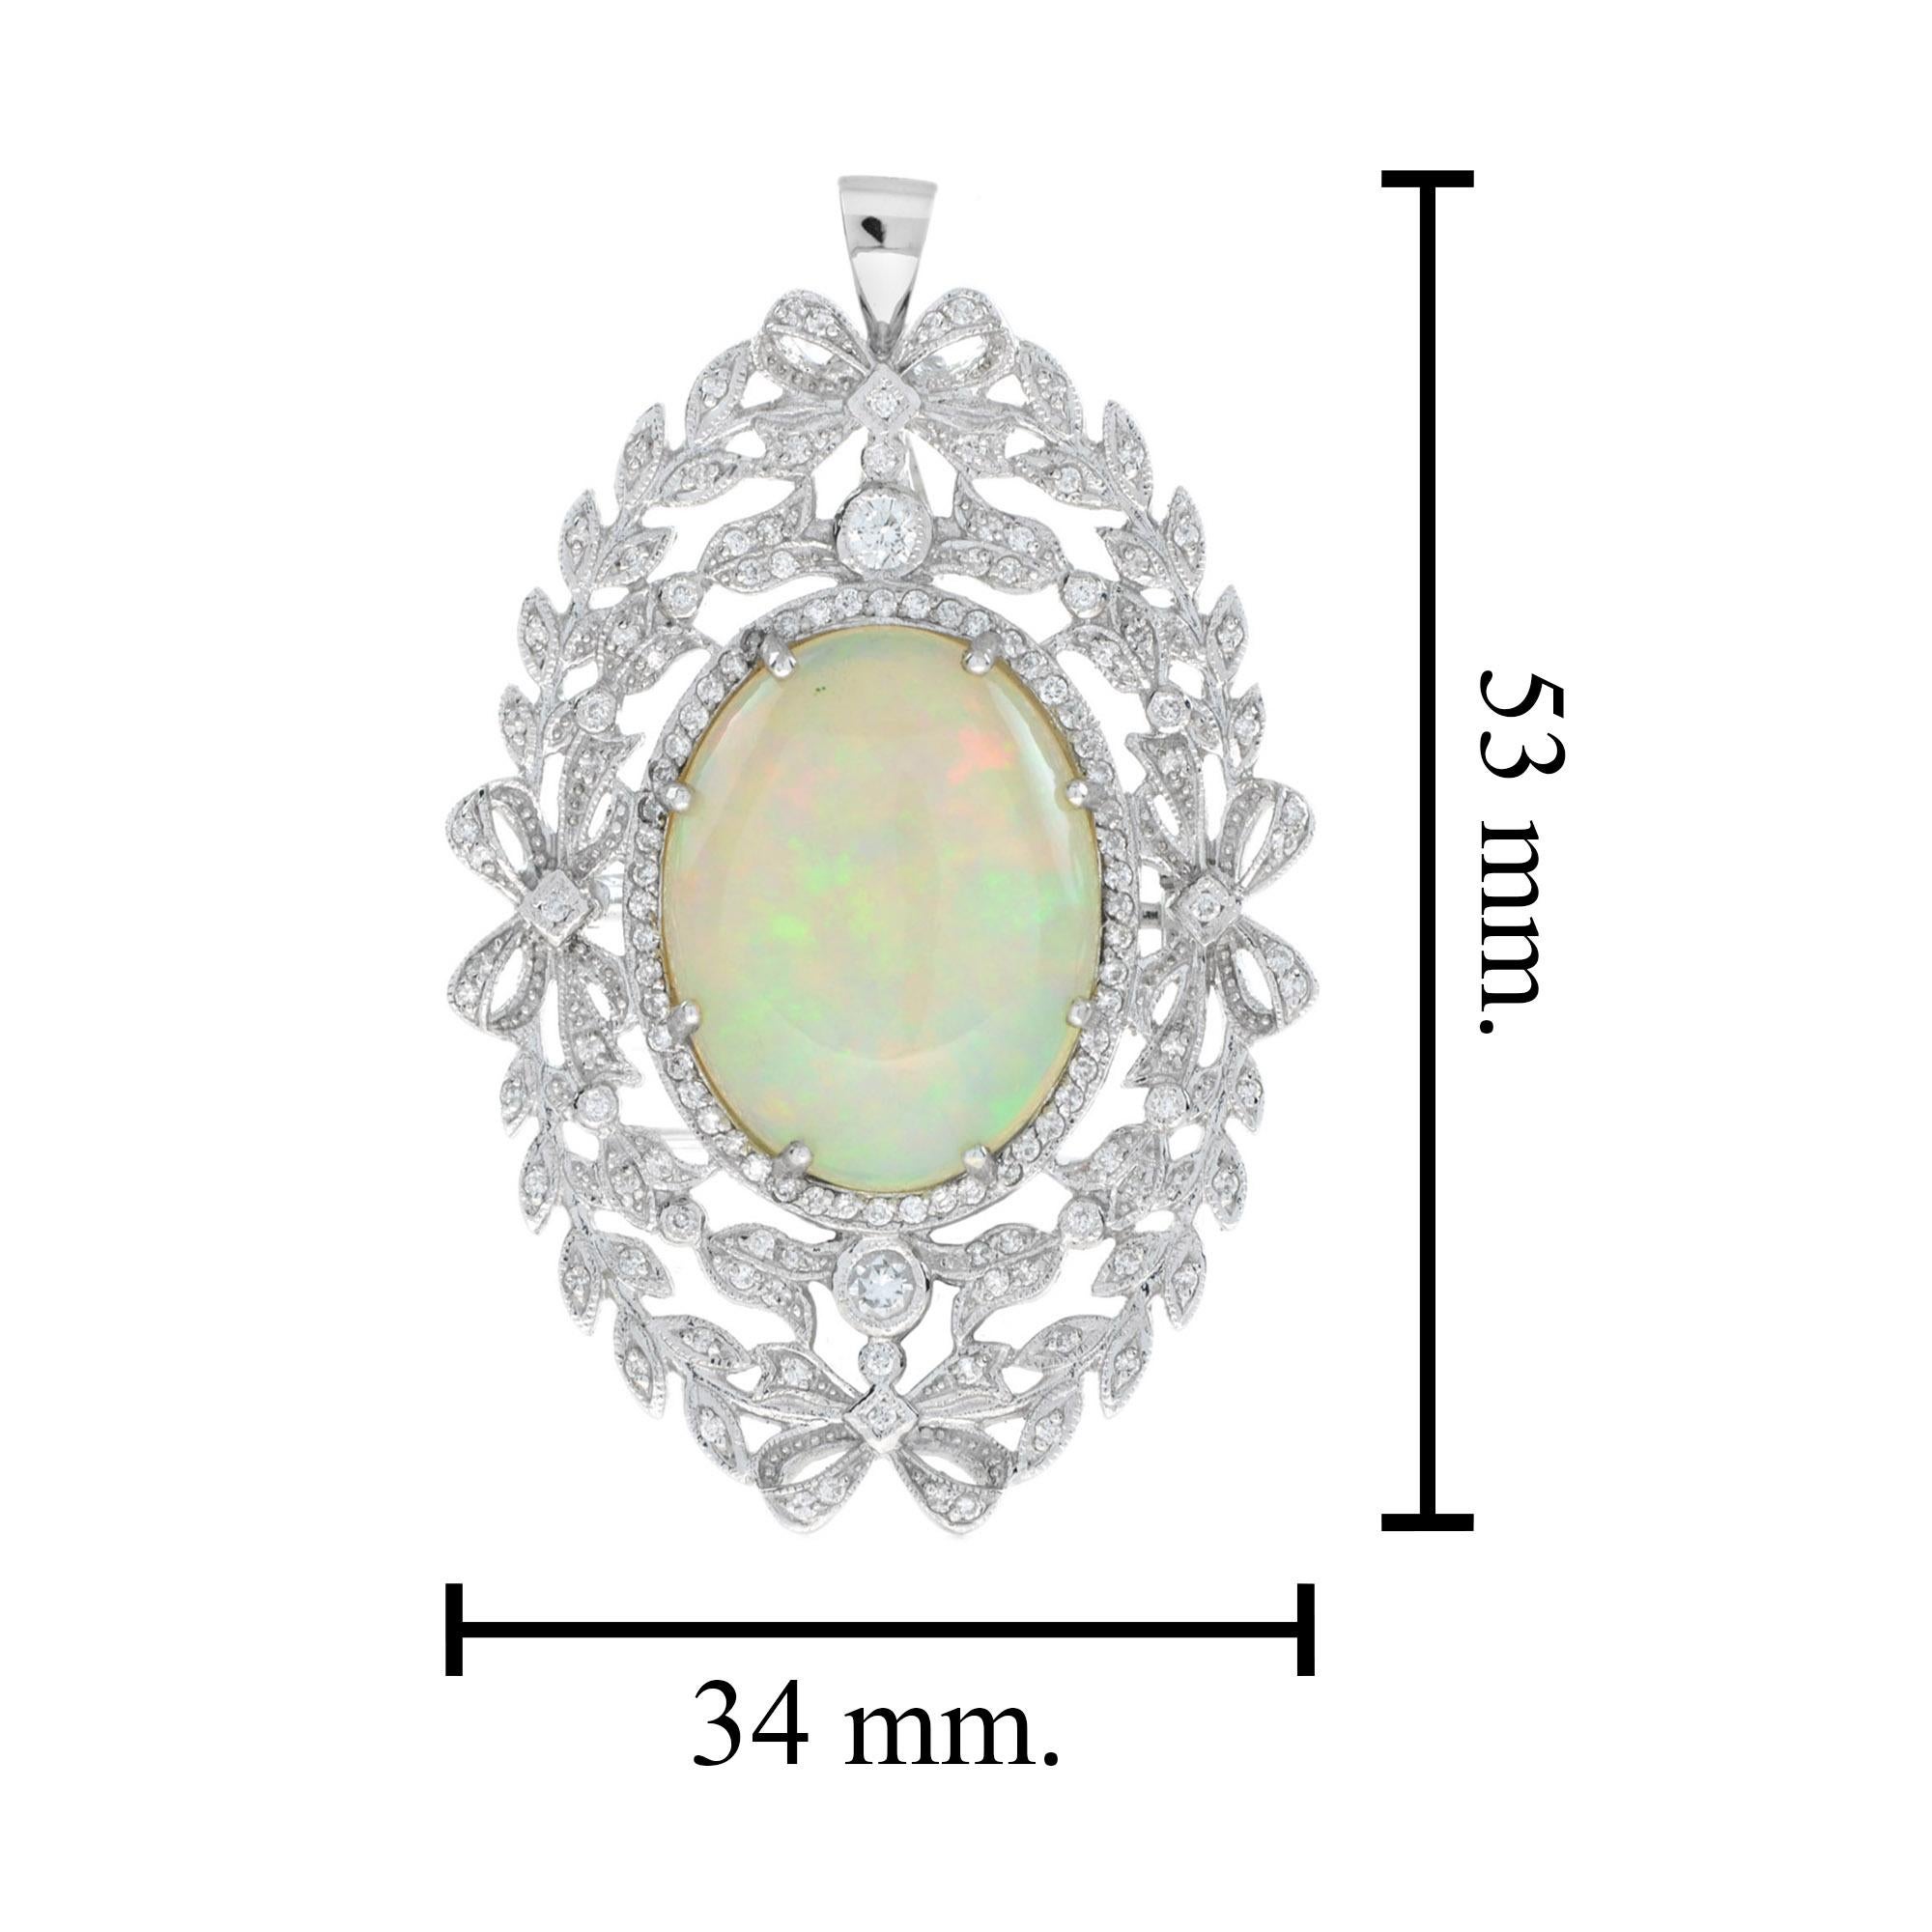 Edwardian Style 13.43 Ct. Ethiopian Opal and Diamond Brooch in 18K White Gold 1